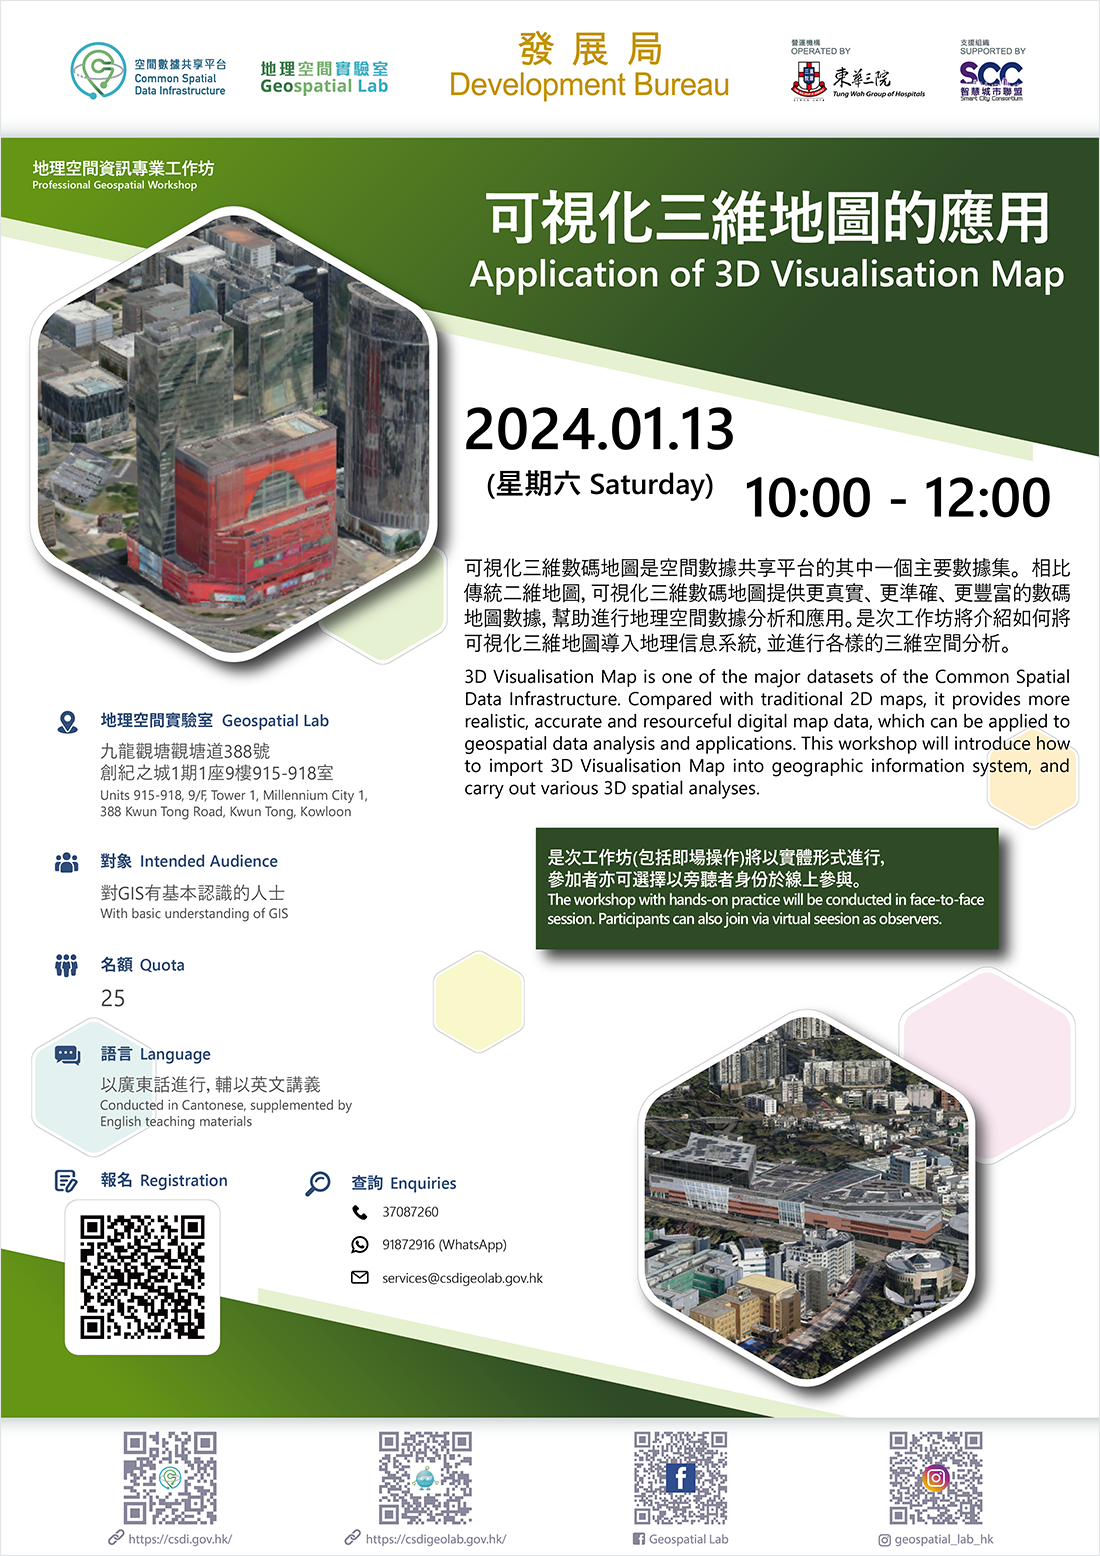 Poster of Professional Geospatial Workshop 